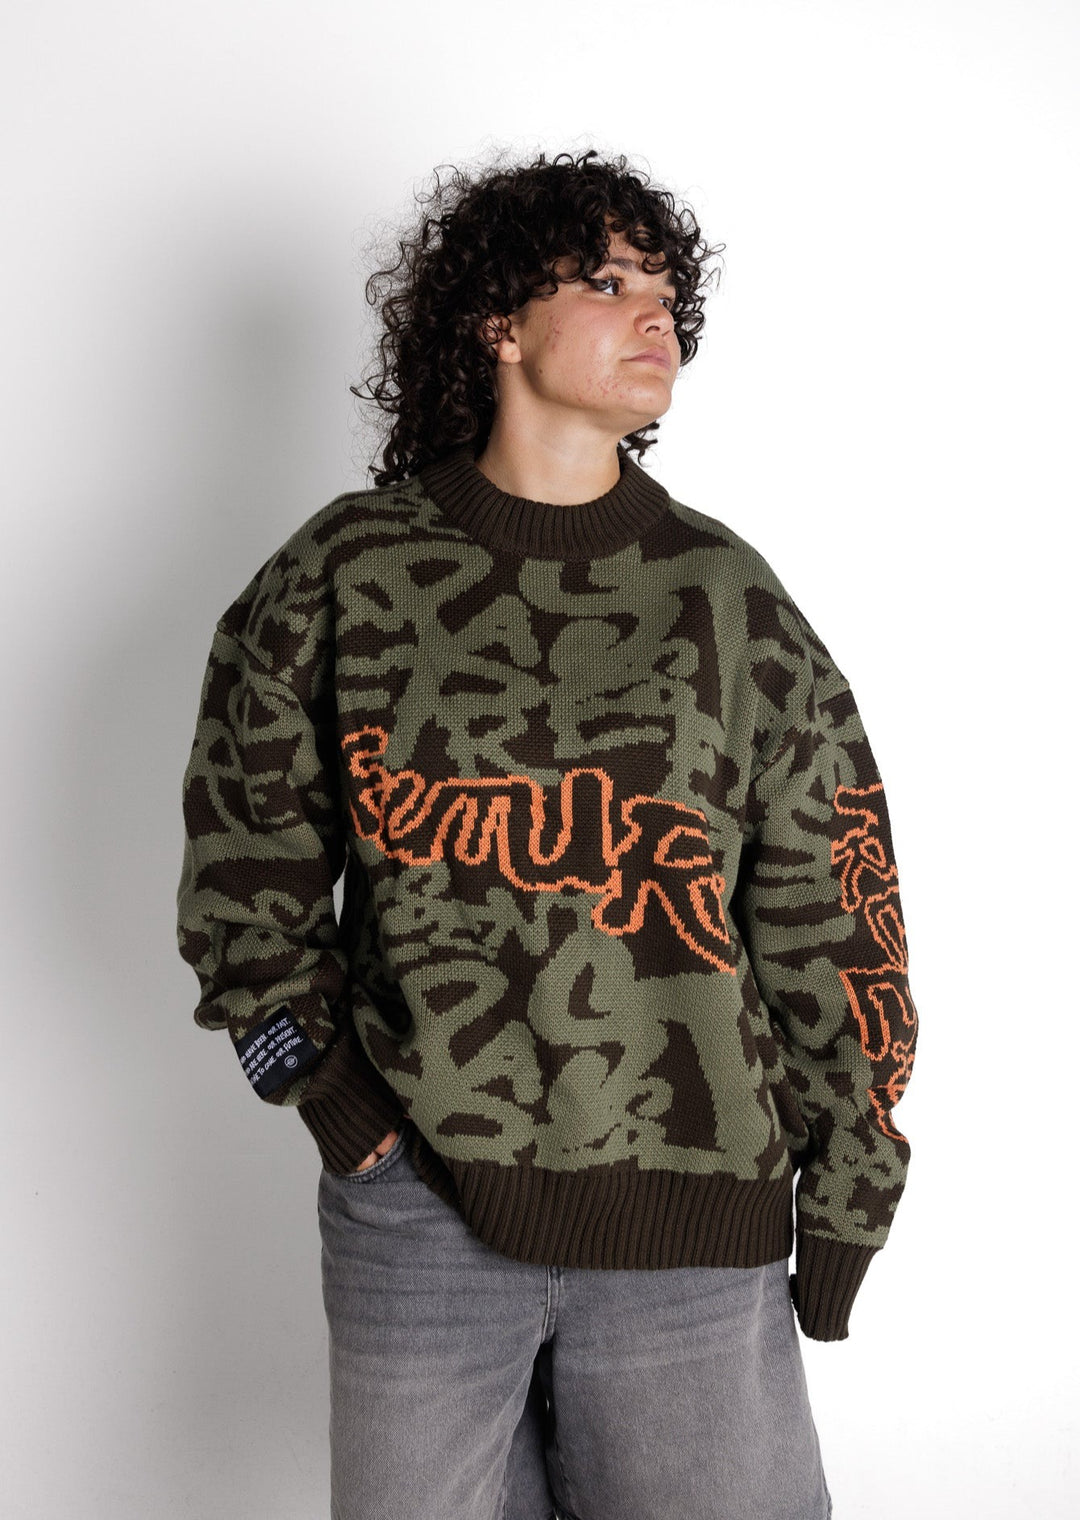 Clothing The Gaps. Past Present Future Knit Jumper. Khaki green colorway heavyweight 100% cotton oversized boxy fit. Has the words 'Past Present Future', in a kahki green graffiti background and 'future' on the front, 'past' on the back, and 'present' running down the arm in a orange outline. The background pattern seamlessly weaves the words past, present, and future. With khaki knitted cuffs and waistband.